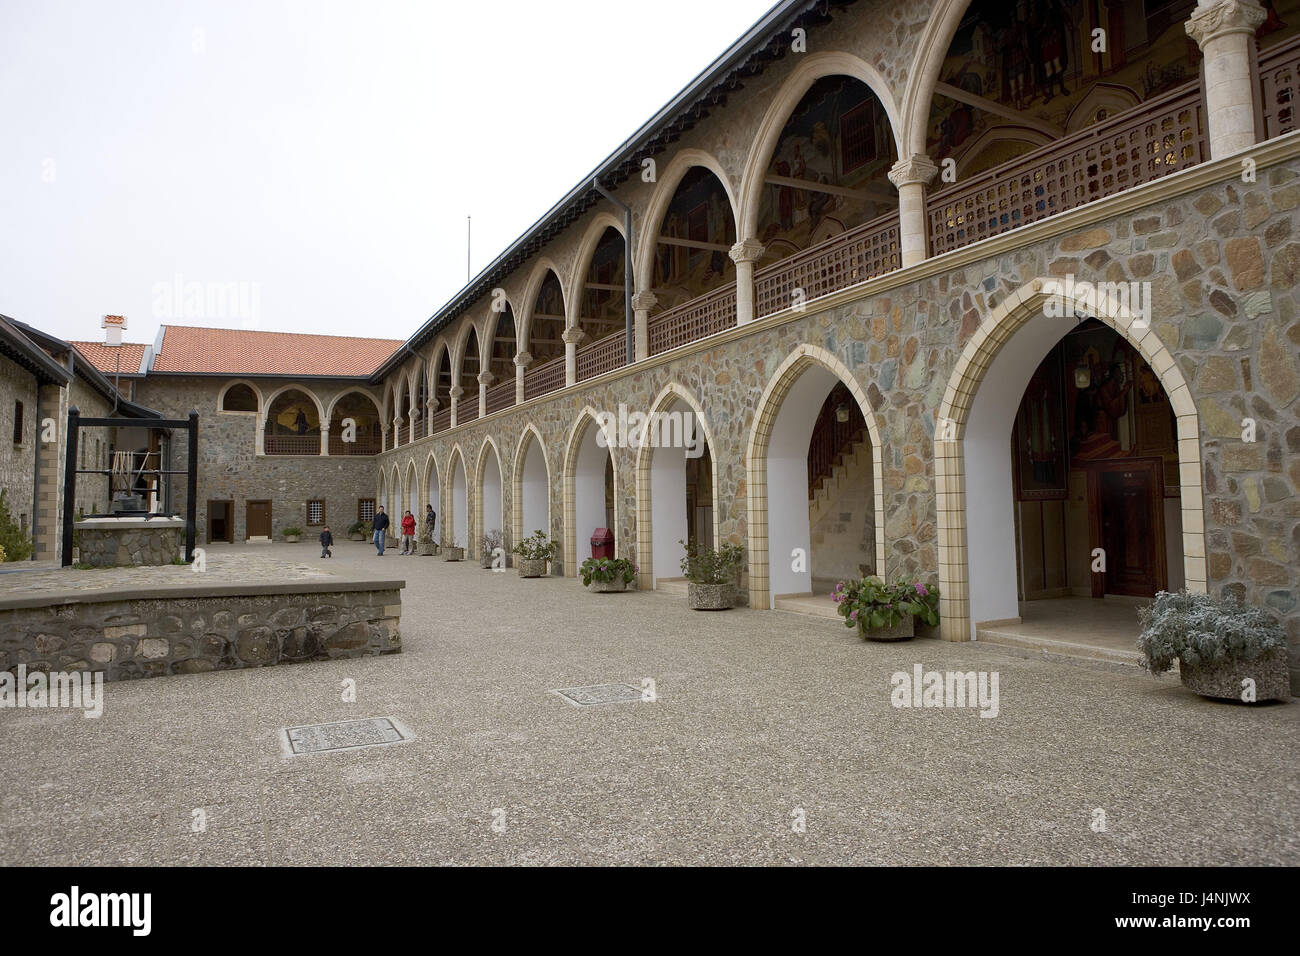 Cyprus, Troodos mountains, Kykkos cloister, inner courtyard, tourist, Mediterranean island, island, inland, mountain region, building, cloister, Kykkos, cloister attachment, overview, outside, place of interest, tourism, travel, destination, people, visitor, Stock Photo